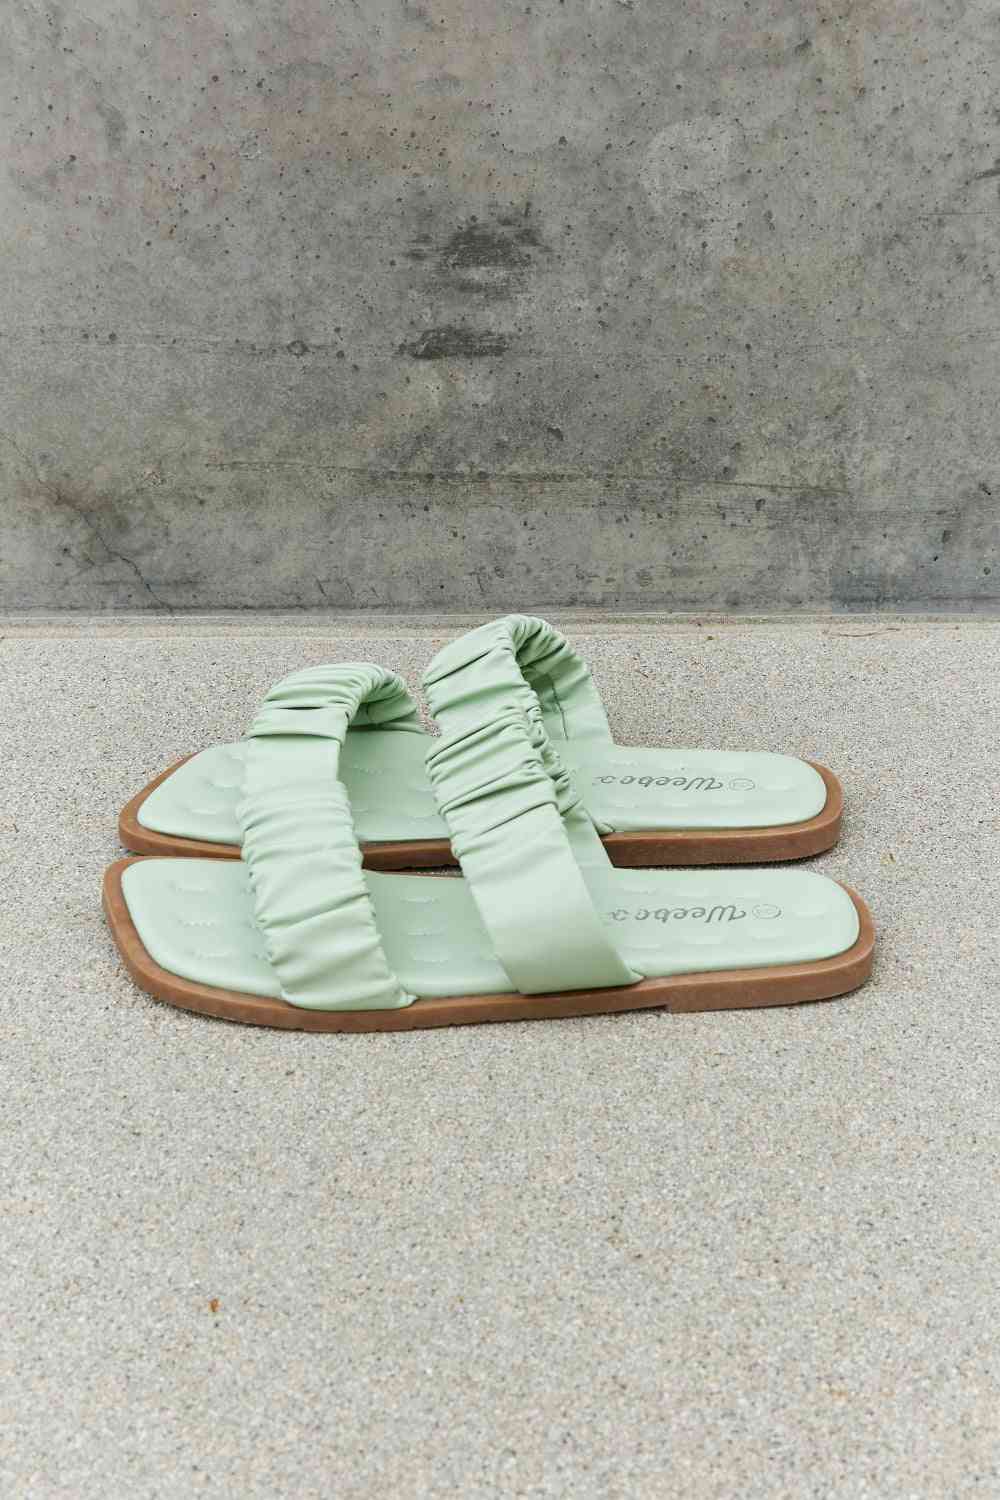 Double Strap Scrunch Sandal in Gum Leaf - All Products - Shoes - 3 - 2024